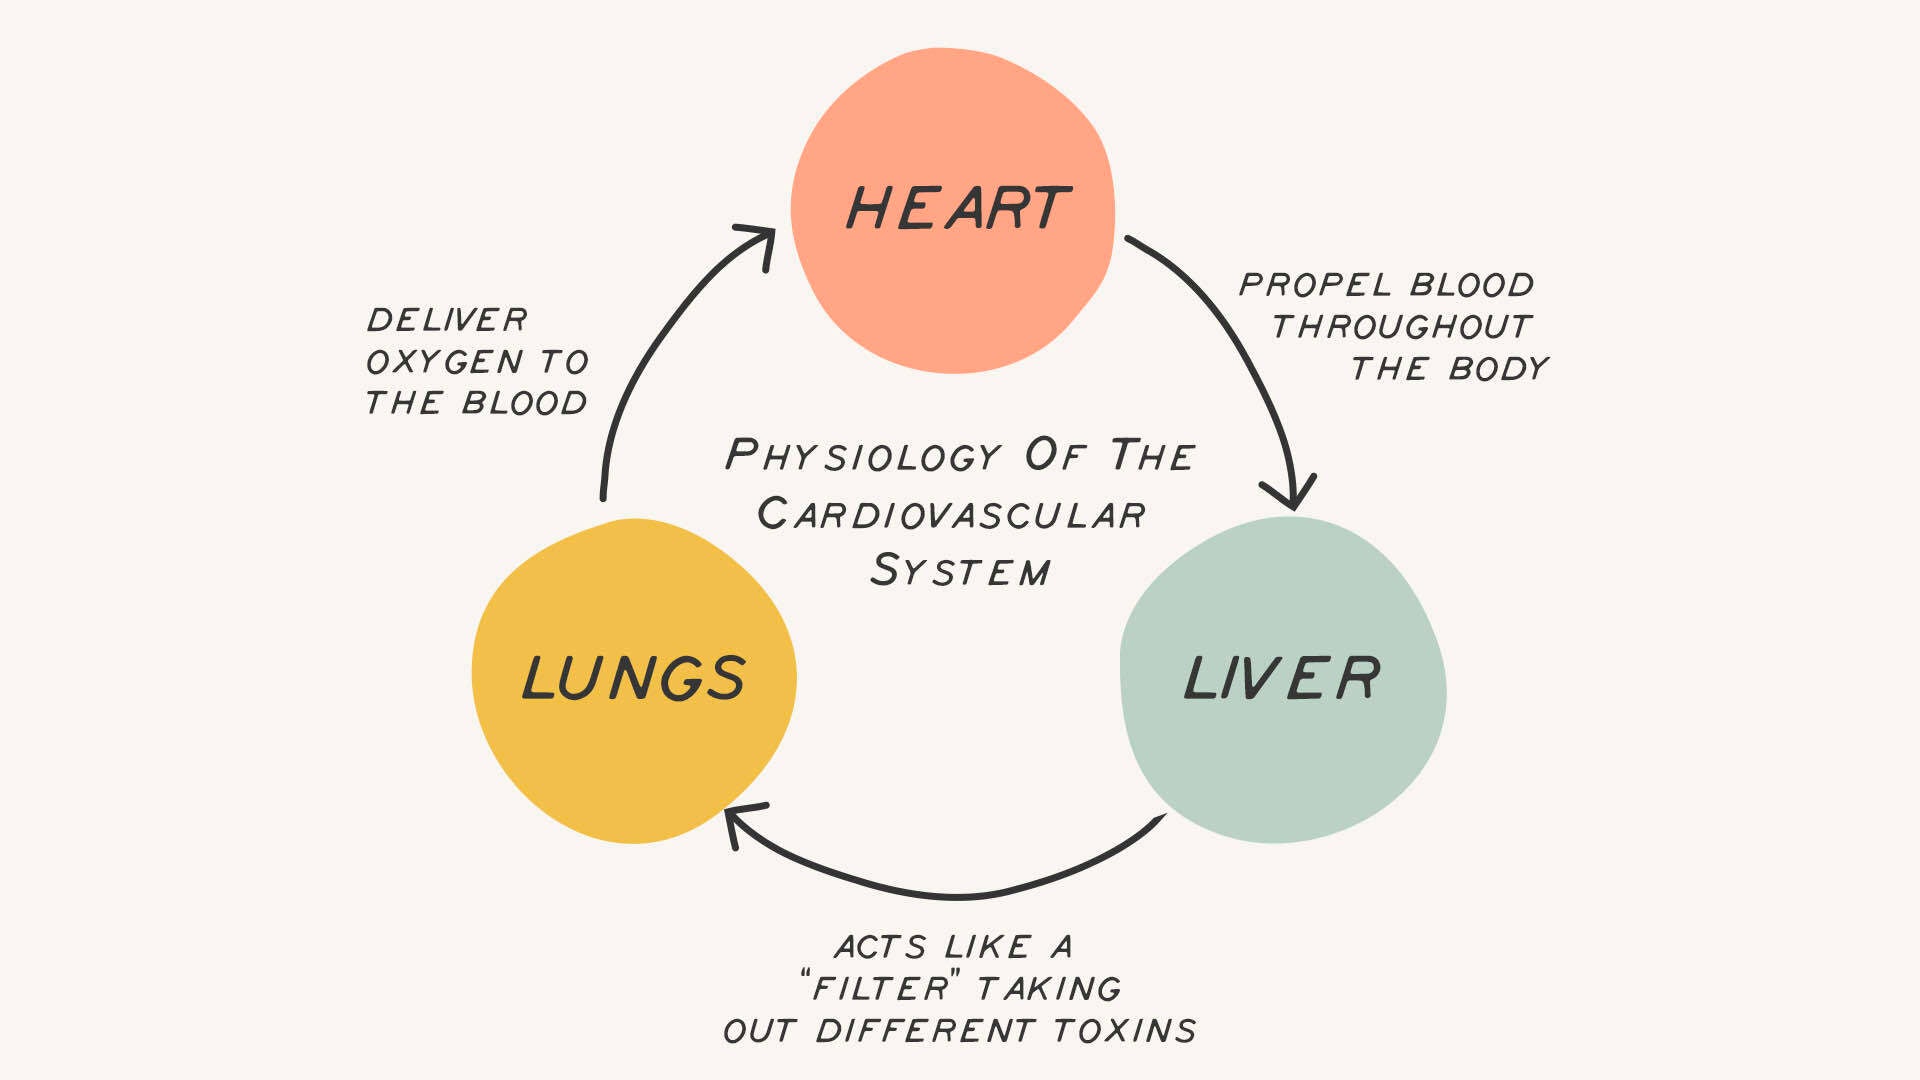 Physiology of the cardiovascular system